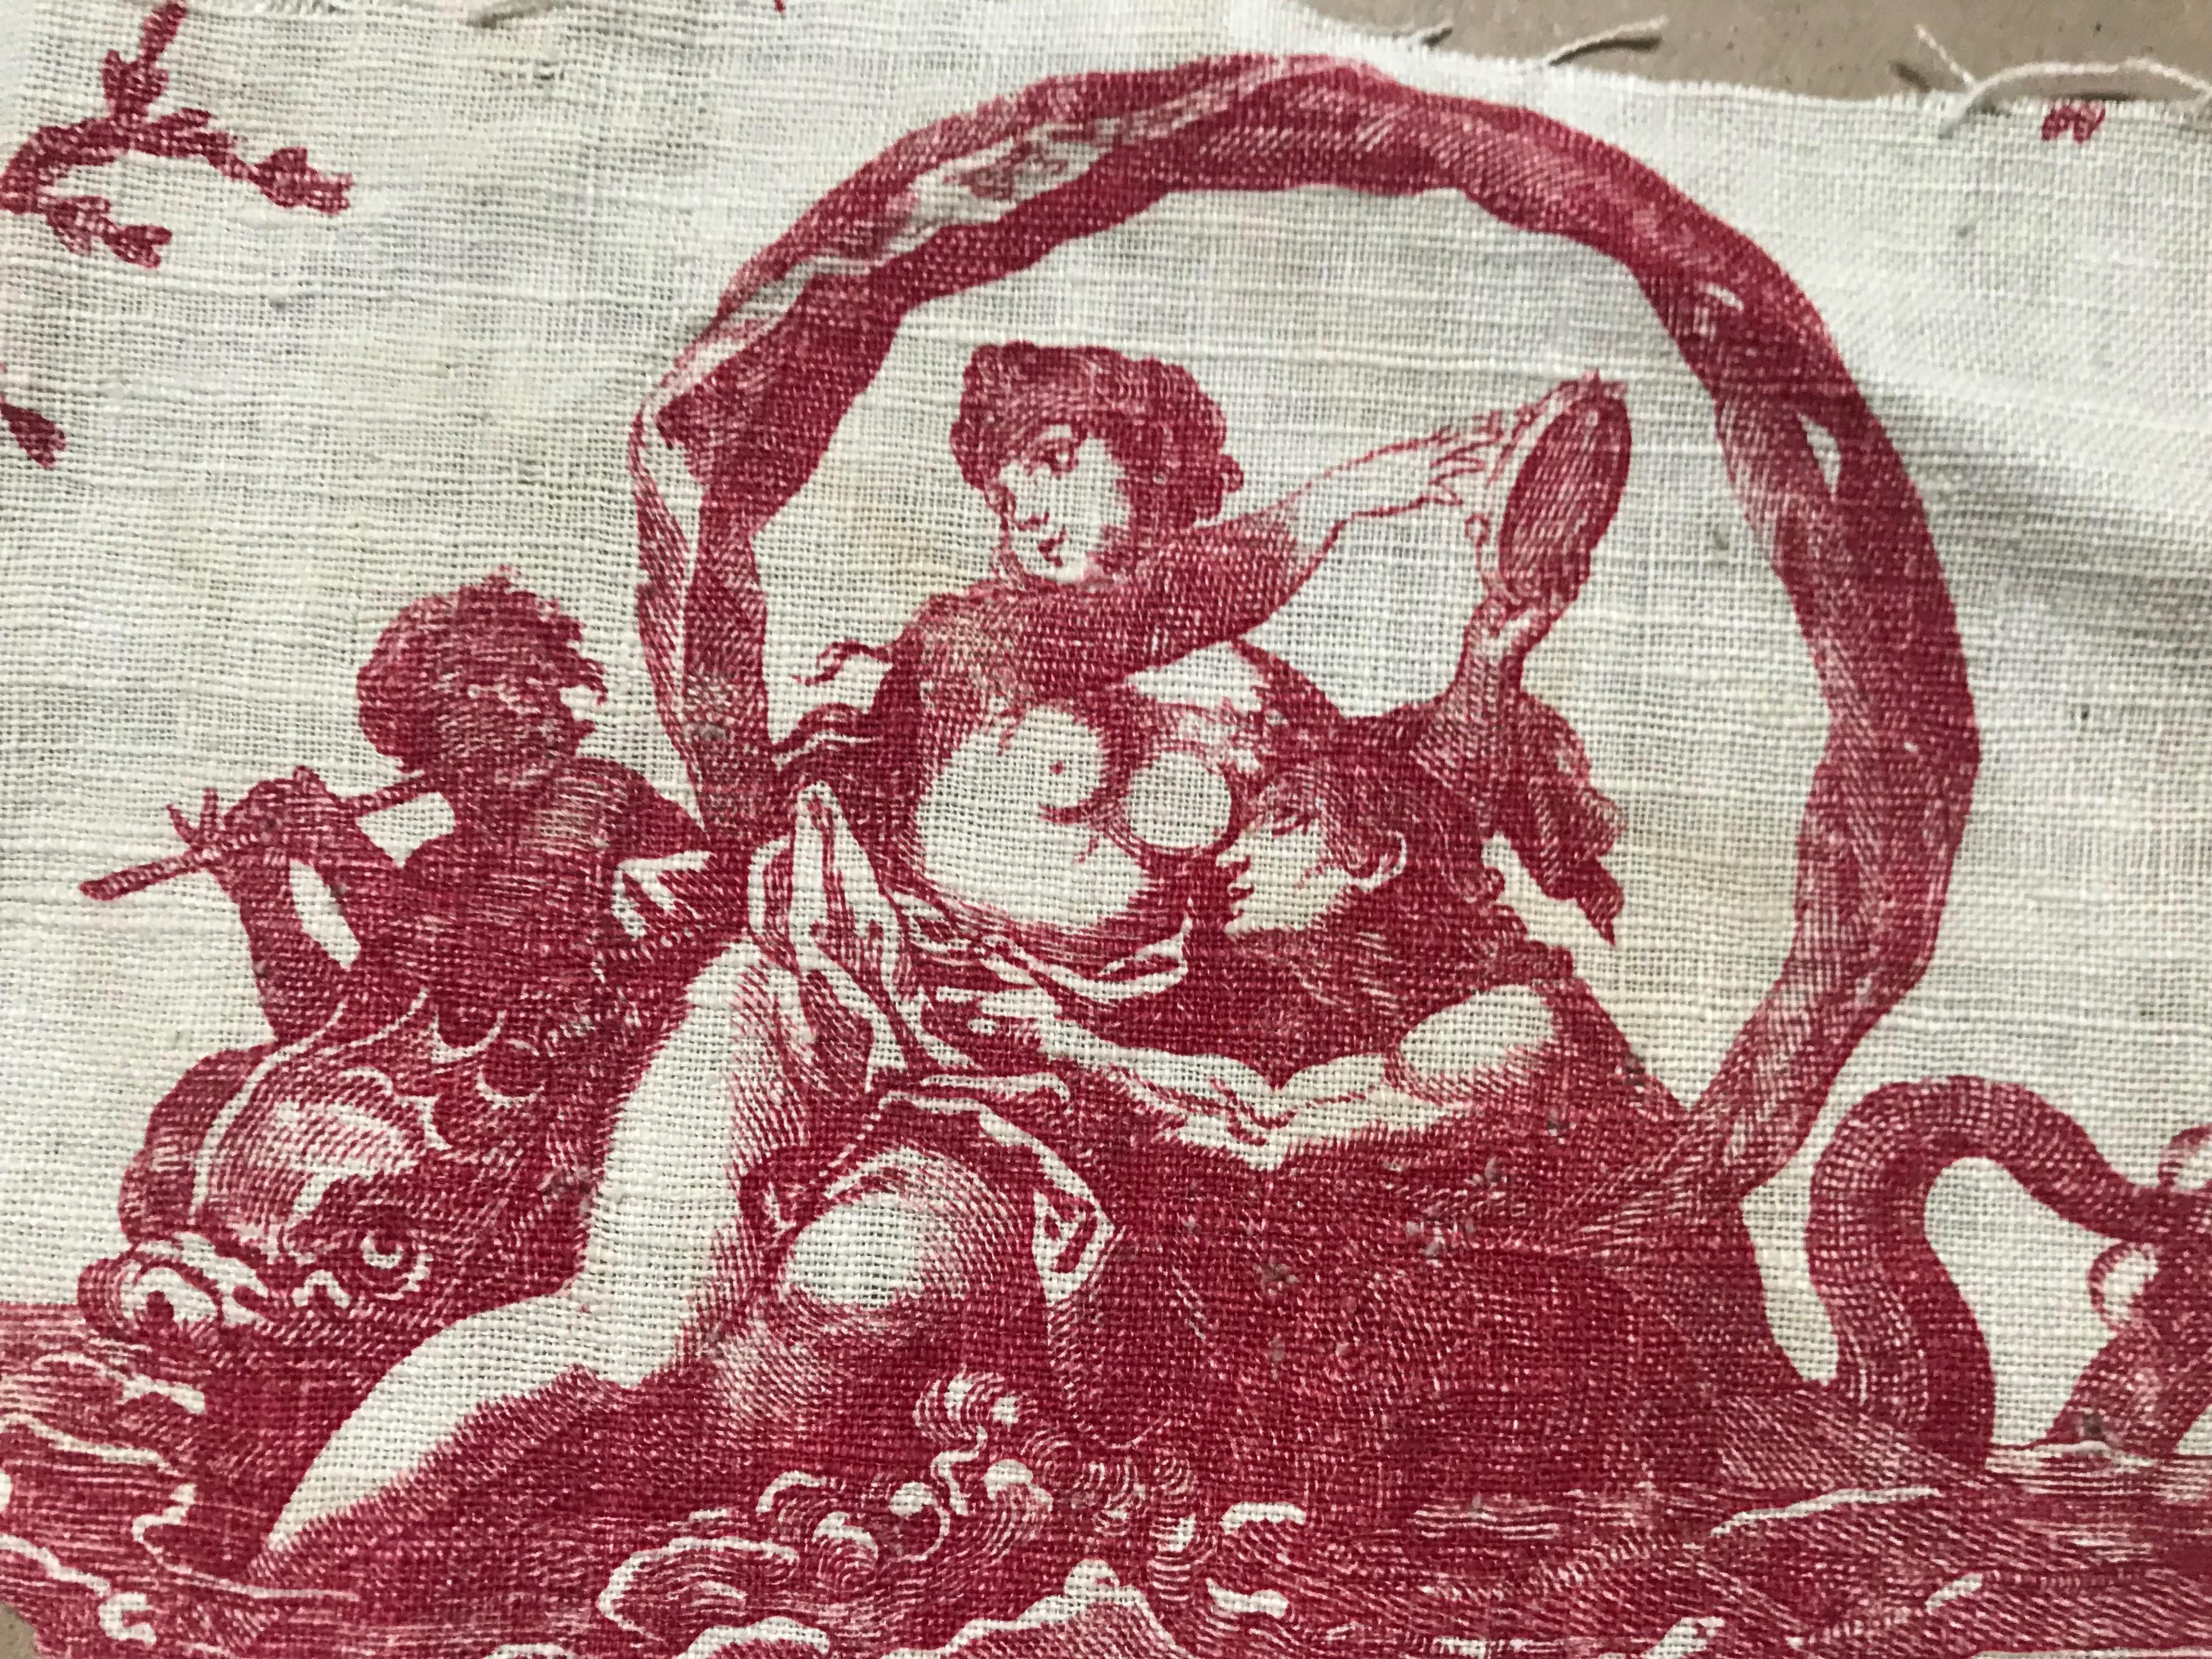 A collection of seven circa 1780 handwoven French toile de jouy fabric fragments attributed to the Oberkampf workshop. The detail of the printing is clear and exquisite.
The last two photographs are provided to give an idea of how elegant these